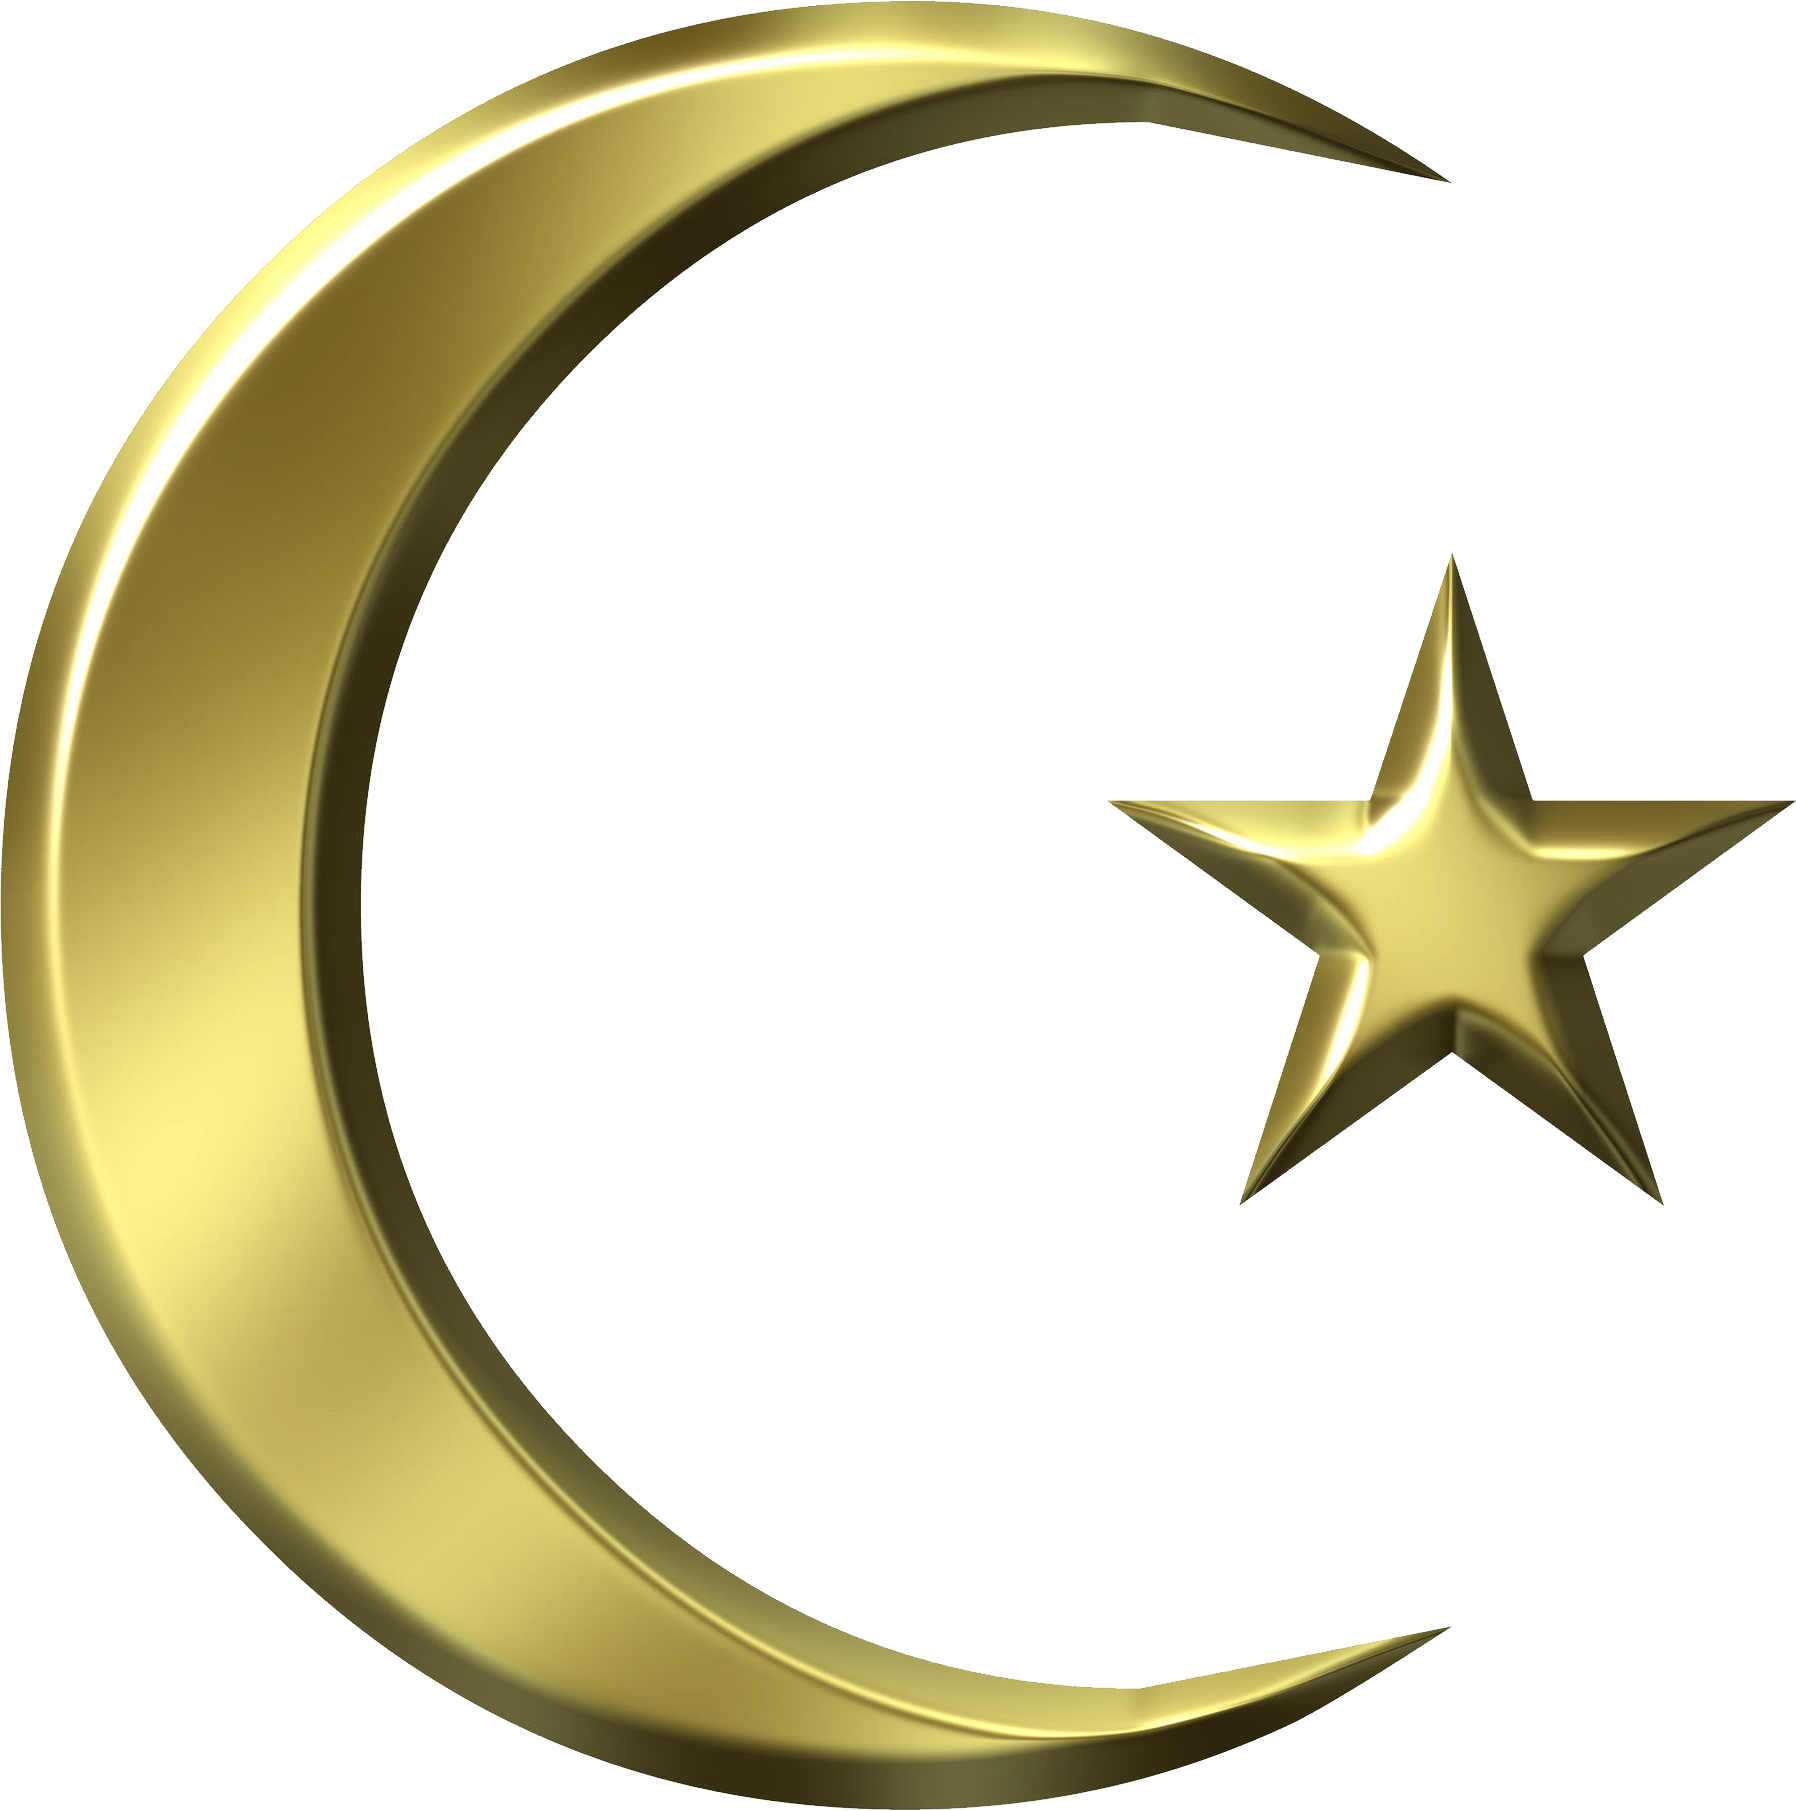 Islam Png Transparent Image Download Size 1796x1811px